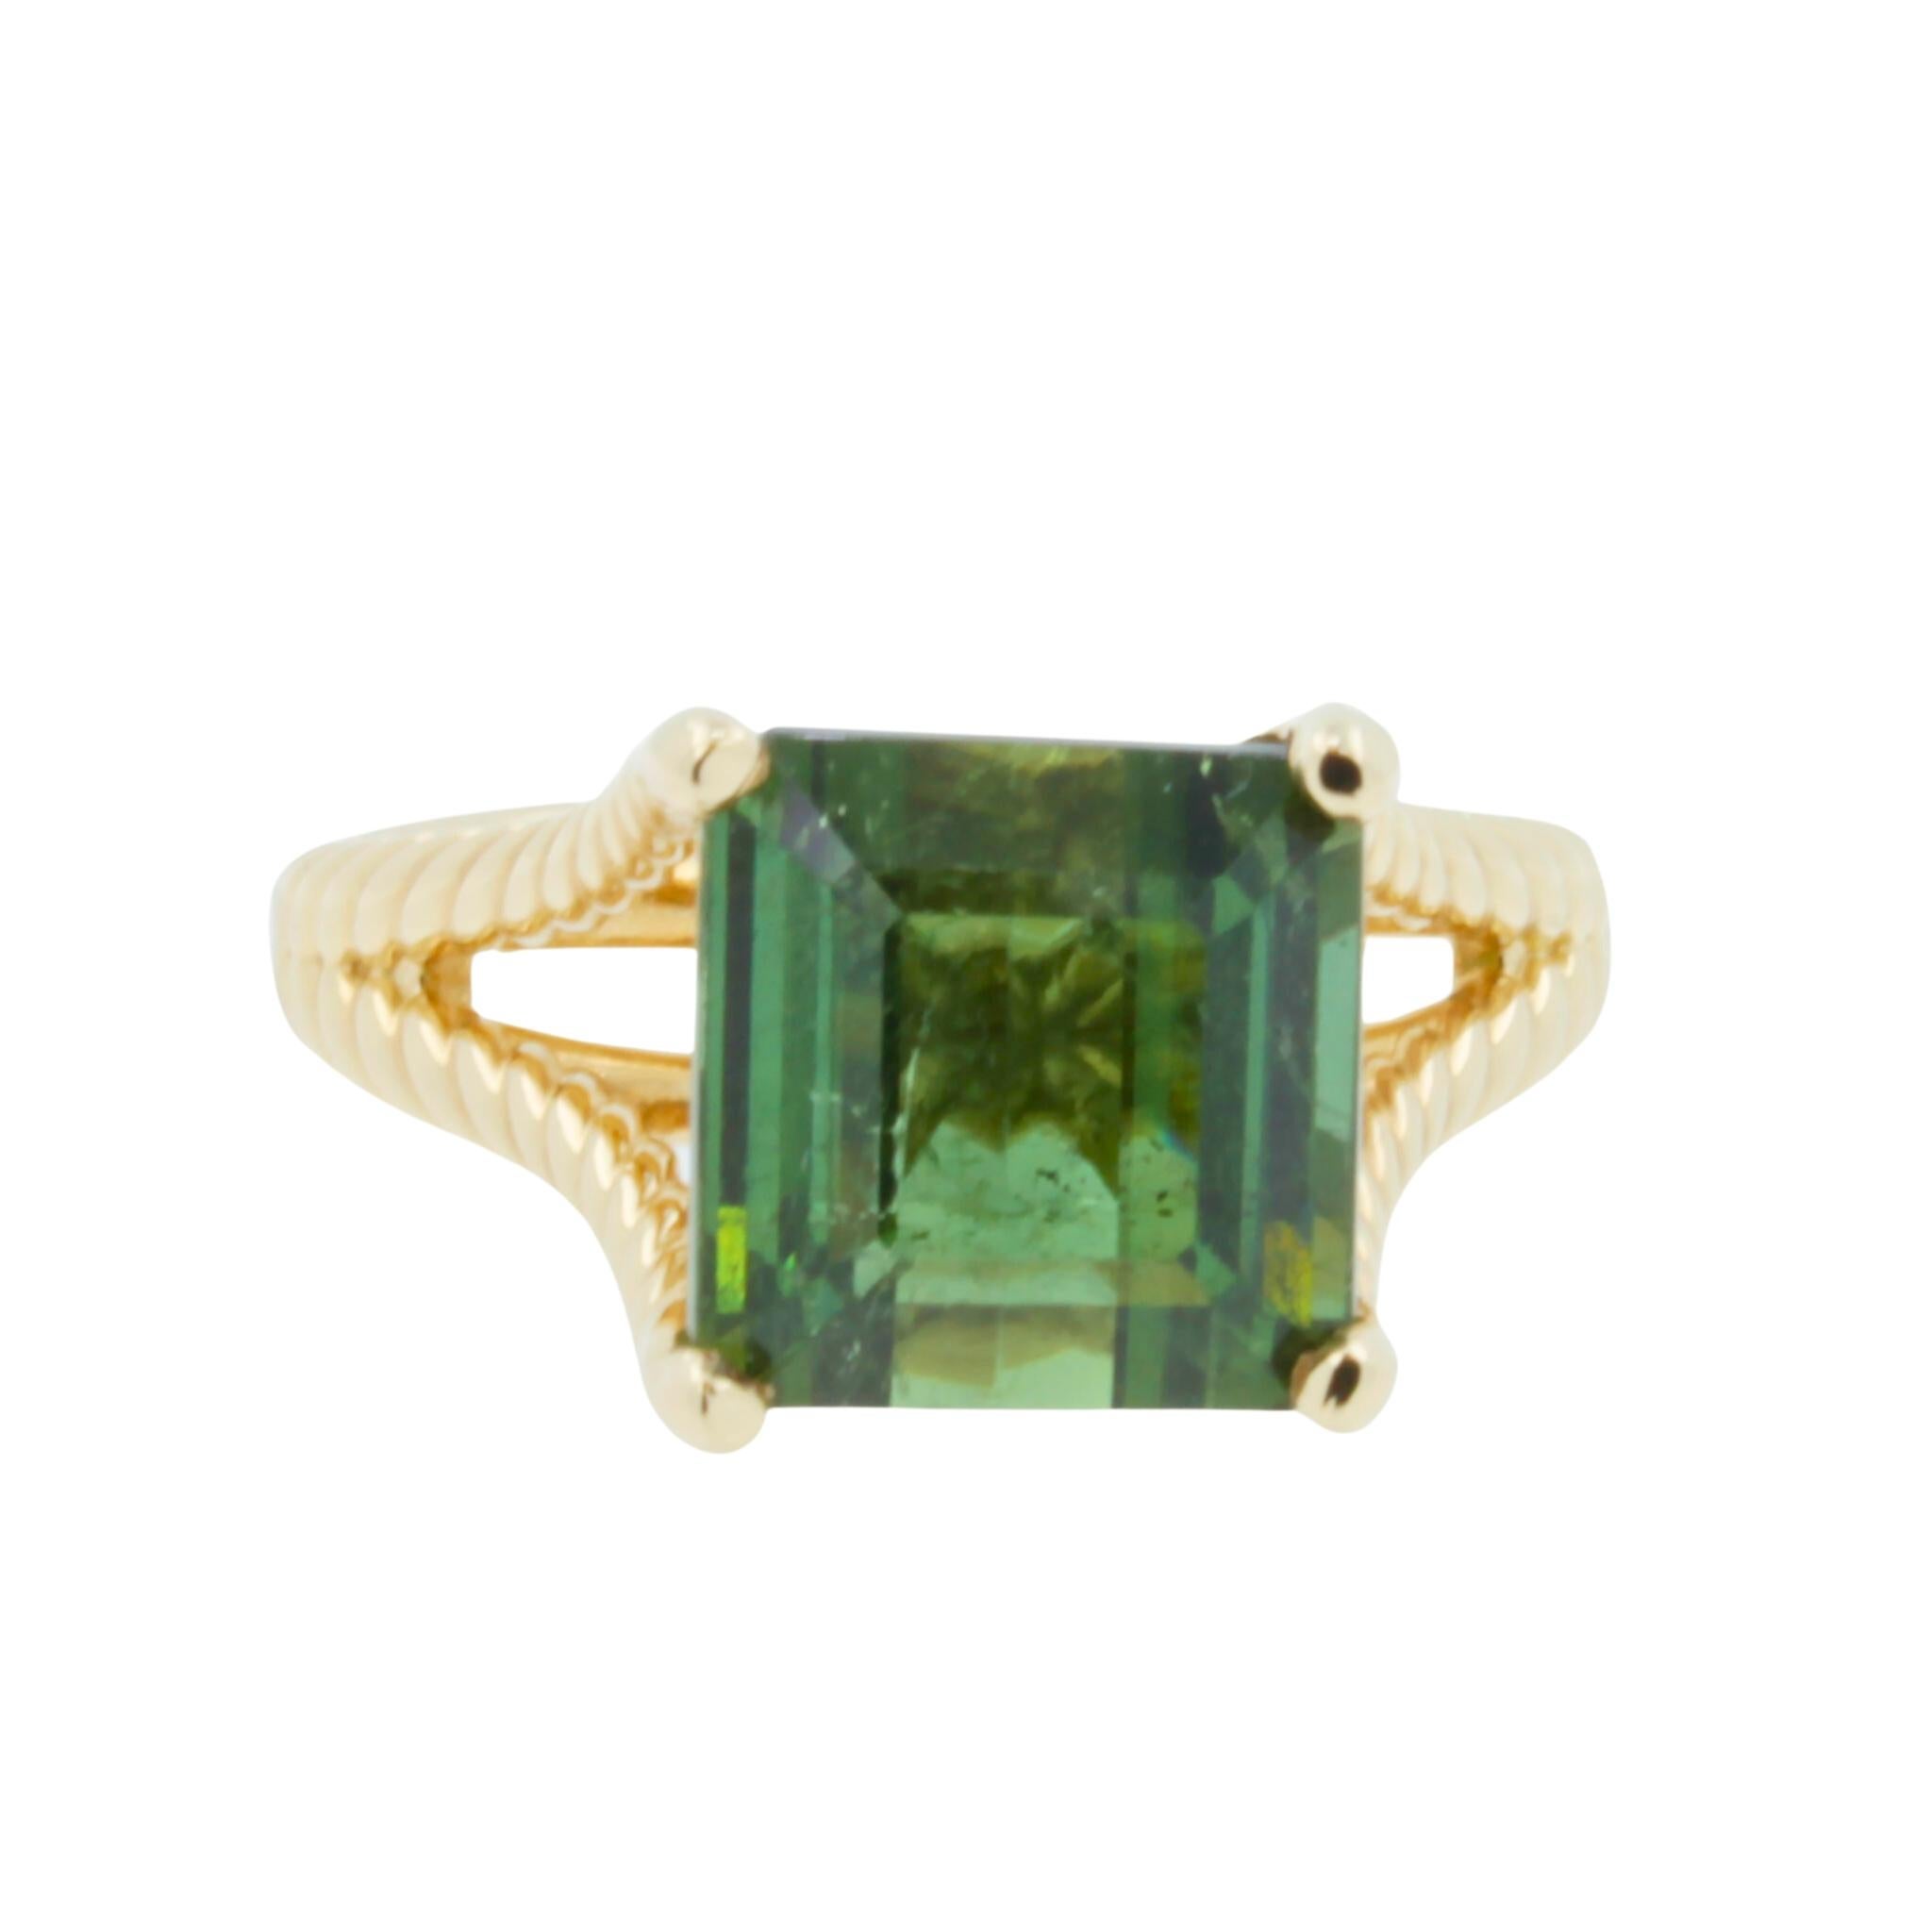 Square Emerald Asscher Green Tourmaline Rope Split Shank Unique Yellow Gold Ring
14K Yellow Gold
8.5 cts Green Tourmaline 
Size 7 - Resizable upon request